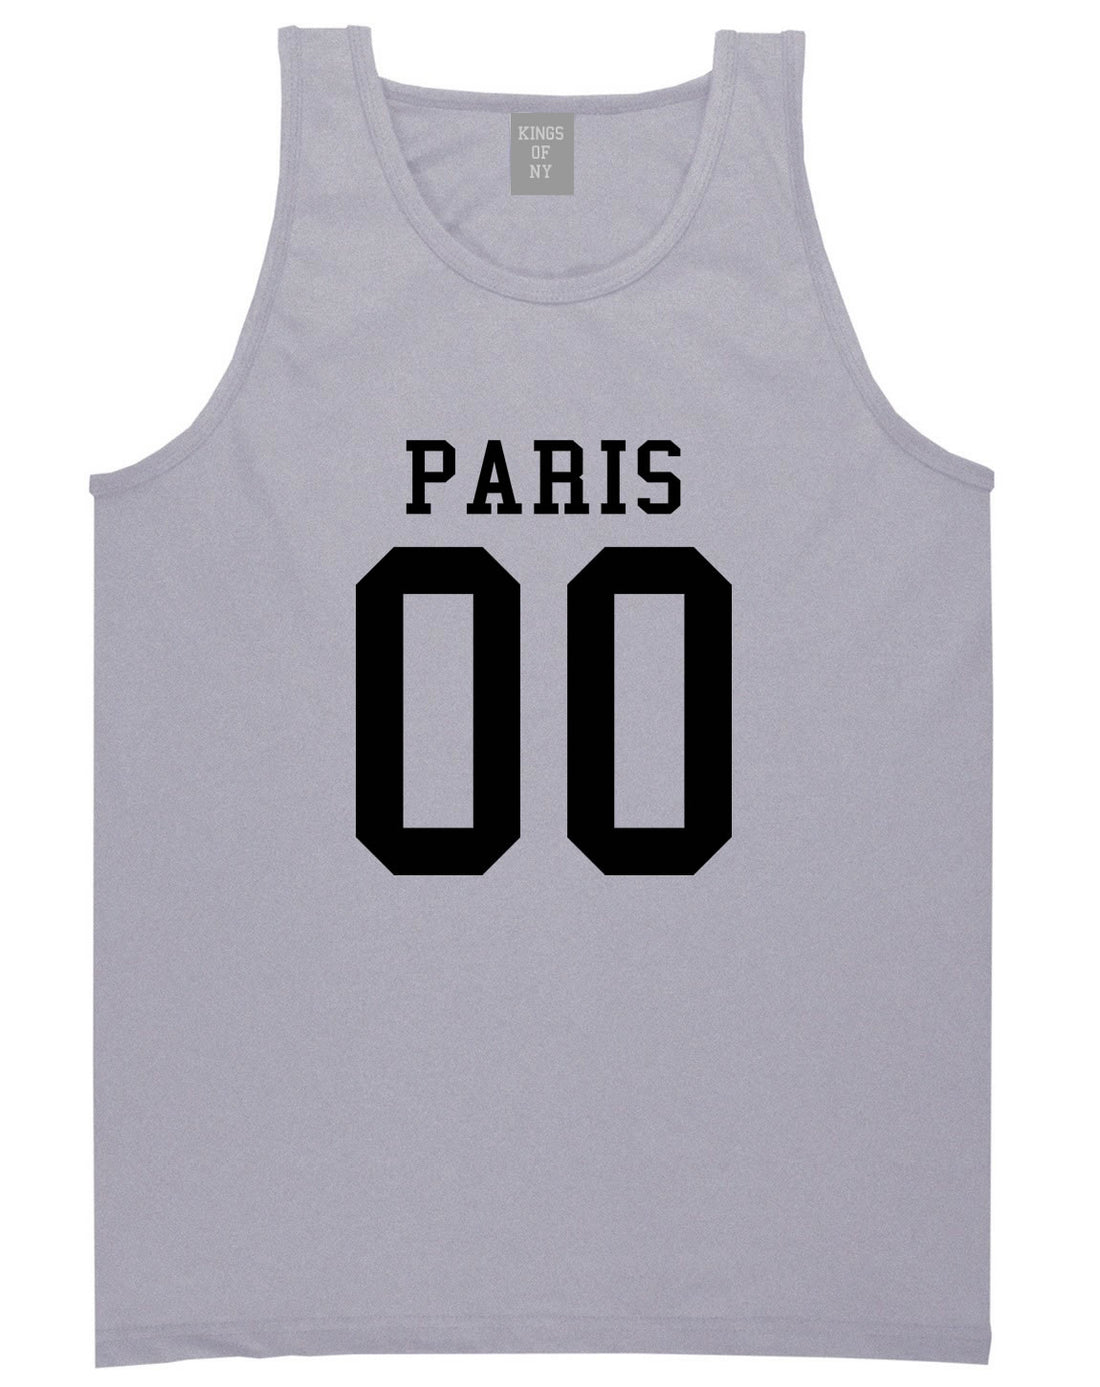 Paris Team 00 Jersey Tank Top in Grey By Kings Of NY